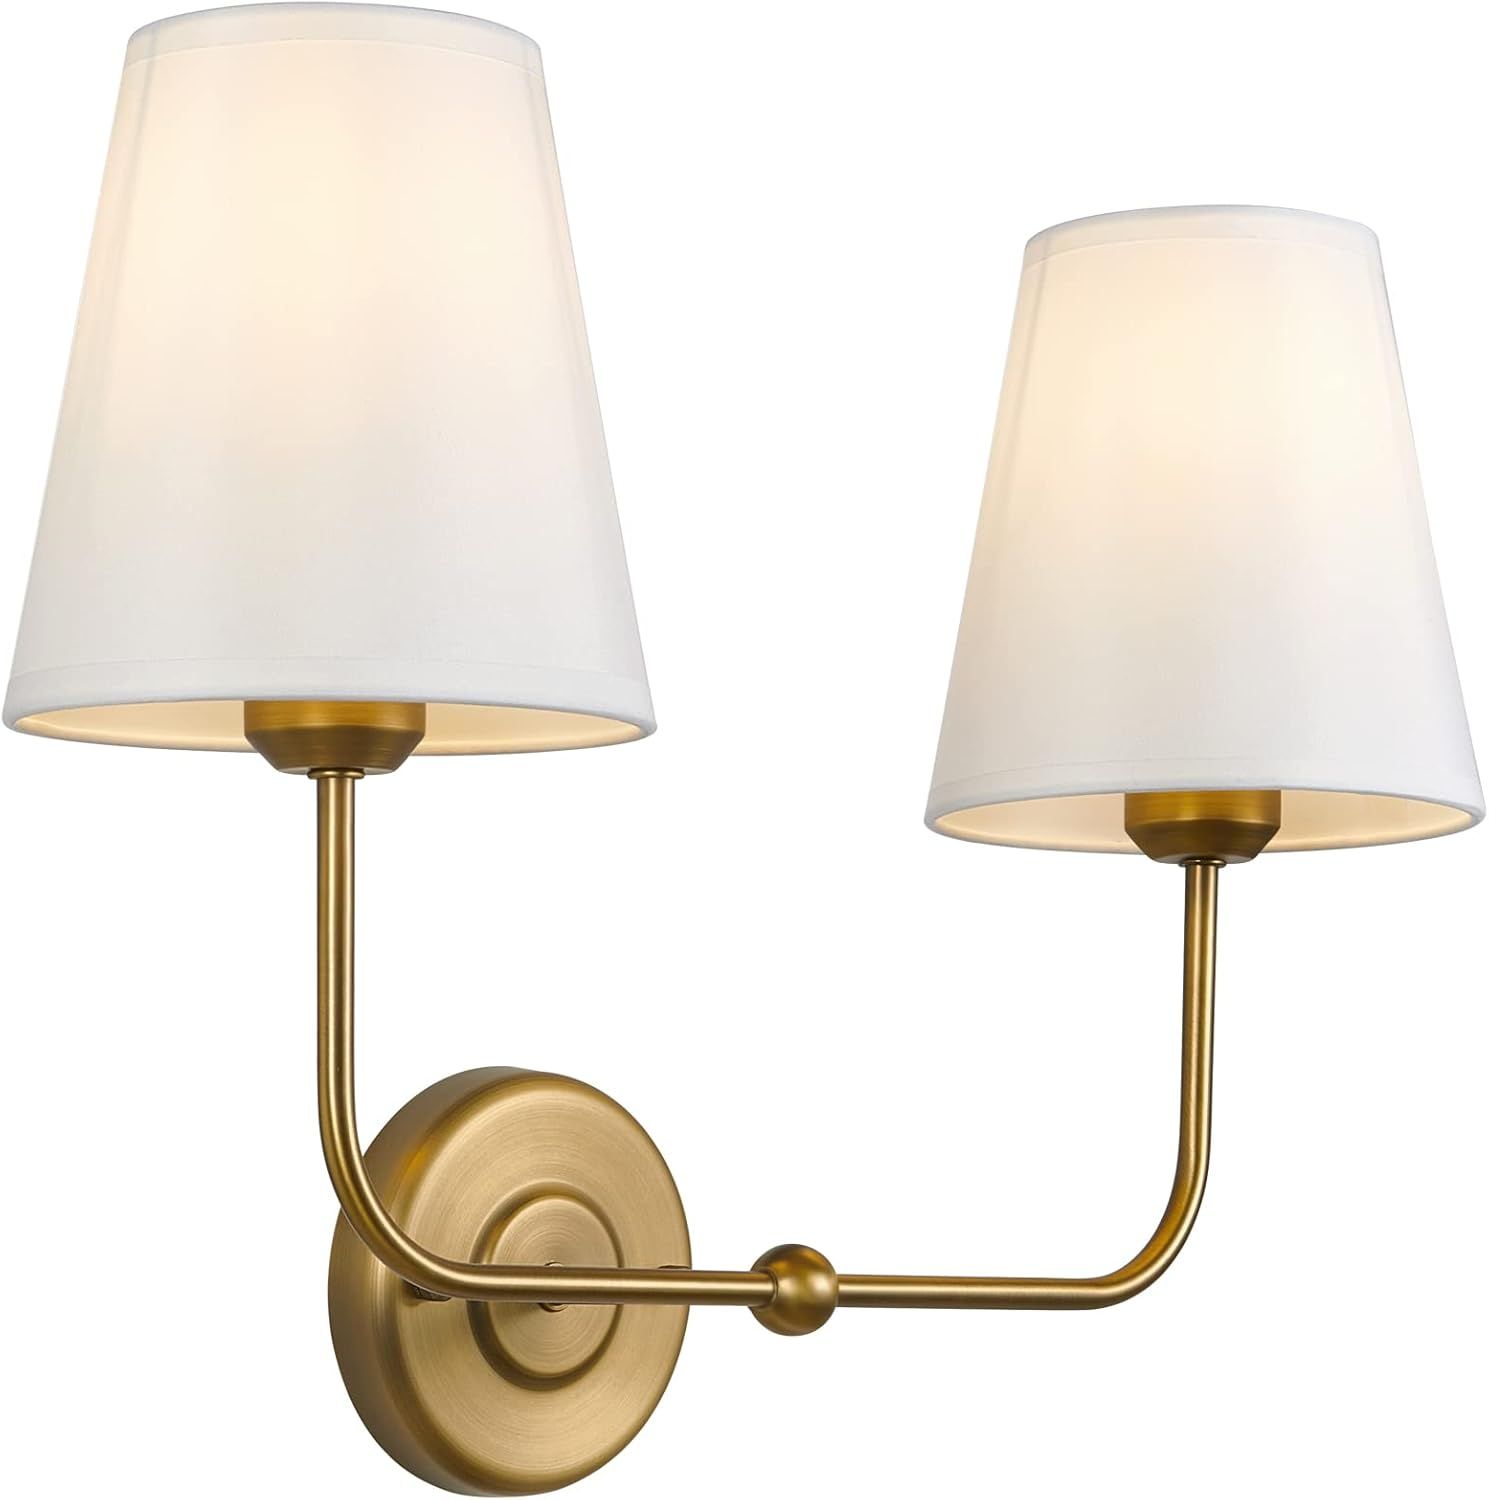 TERLEENART Double Light Wall Sconce with White Fabric Tapered Shades, 2-Light Antique Brass Sconc... | Amazon (US)